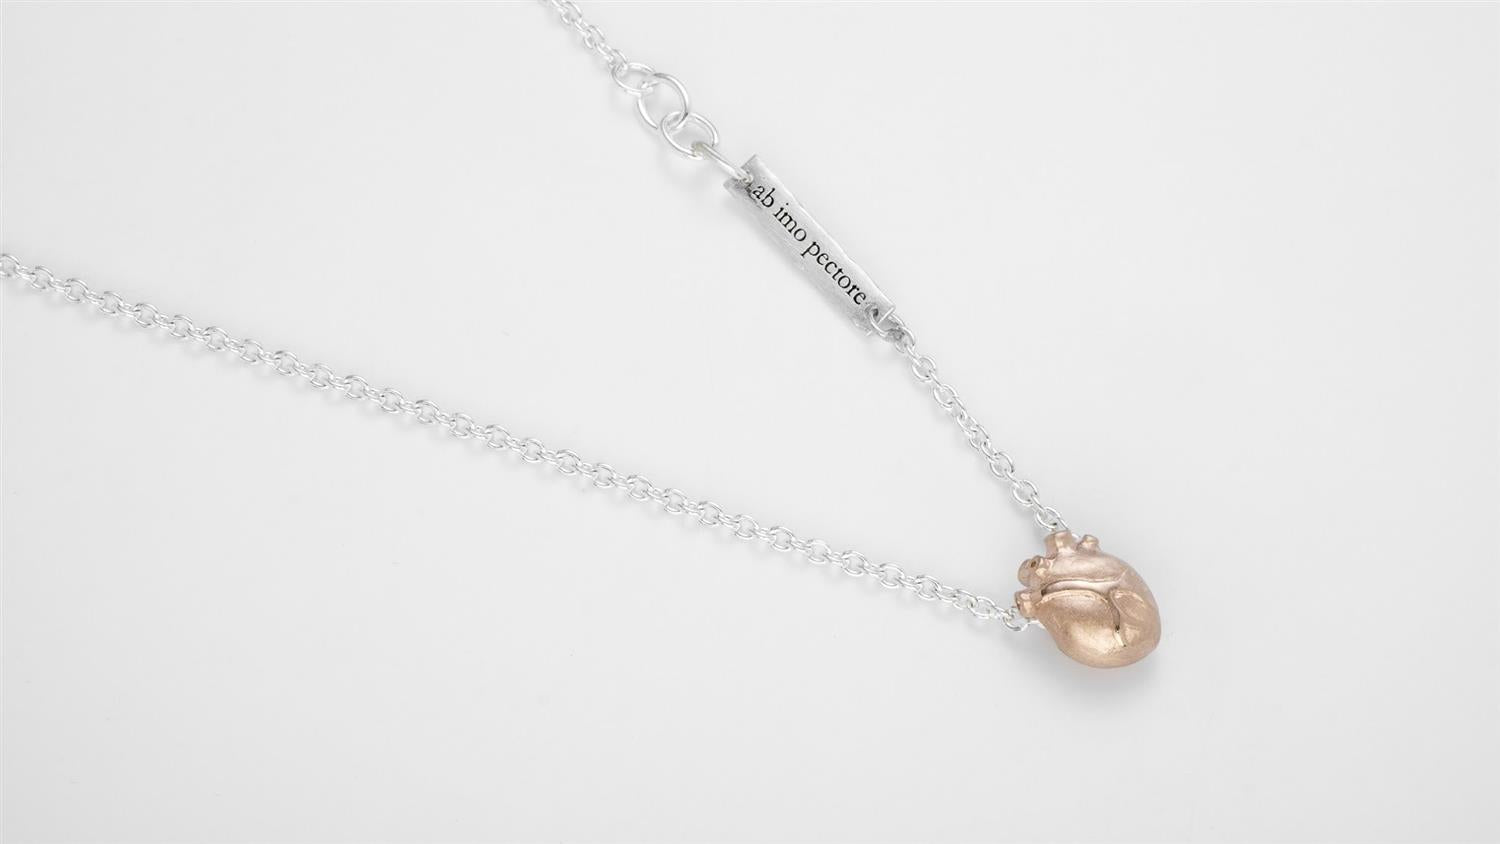 SMALL ROSE ANATOMIC HEART NECKLACE